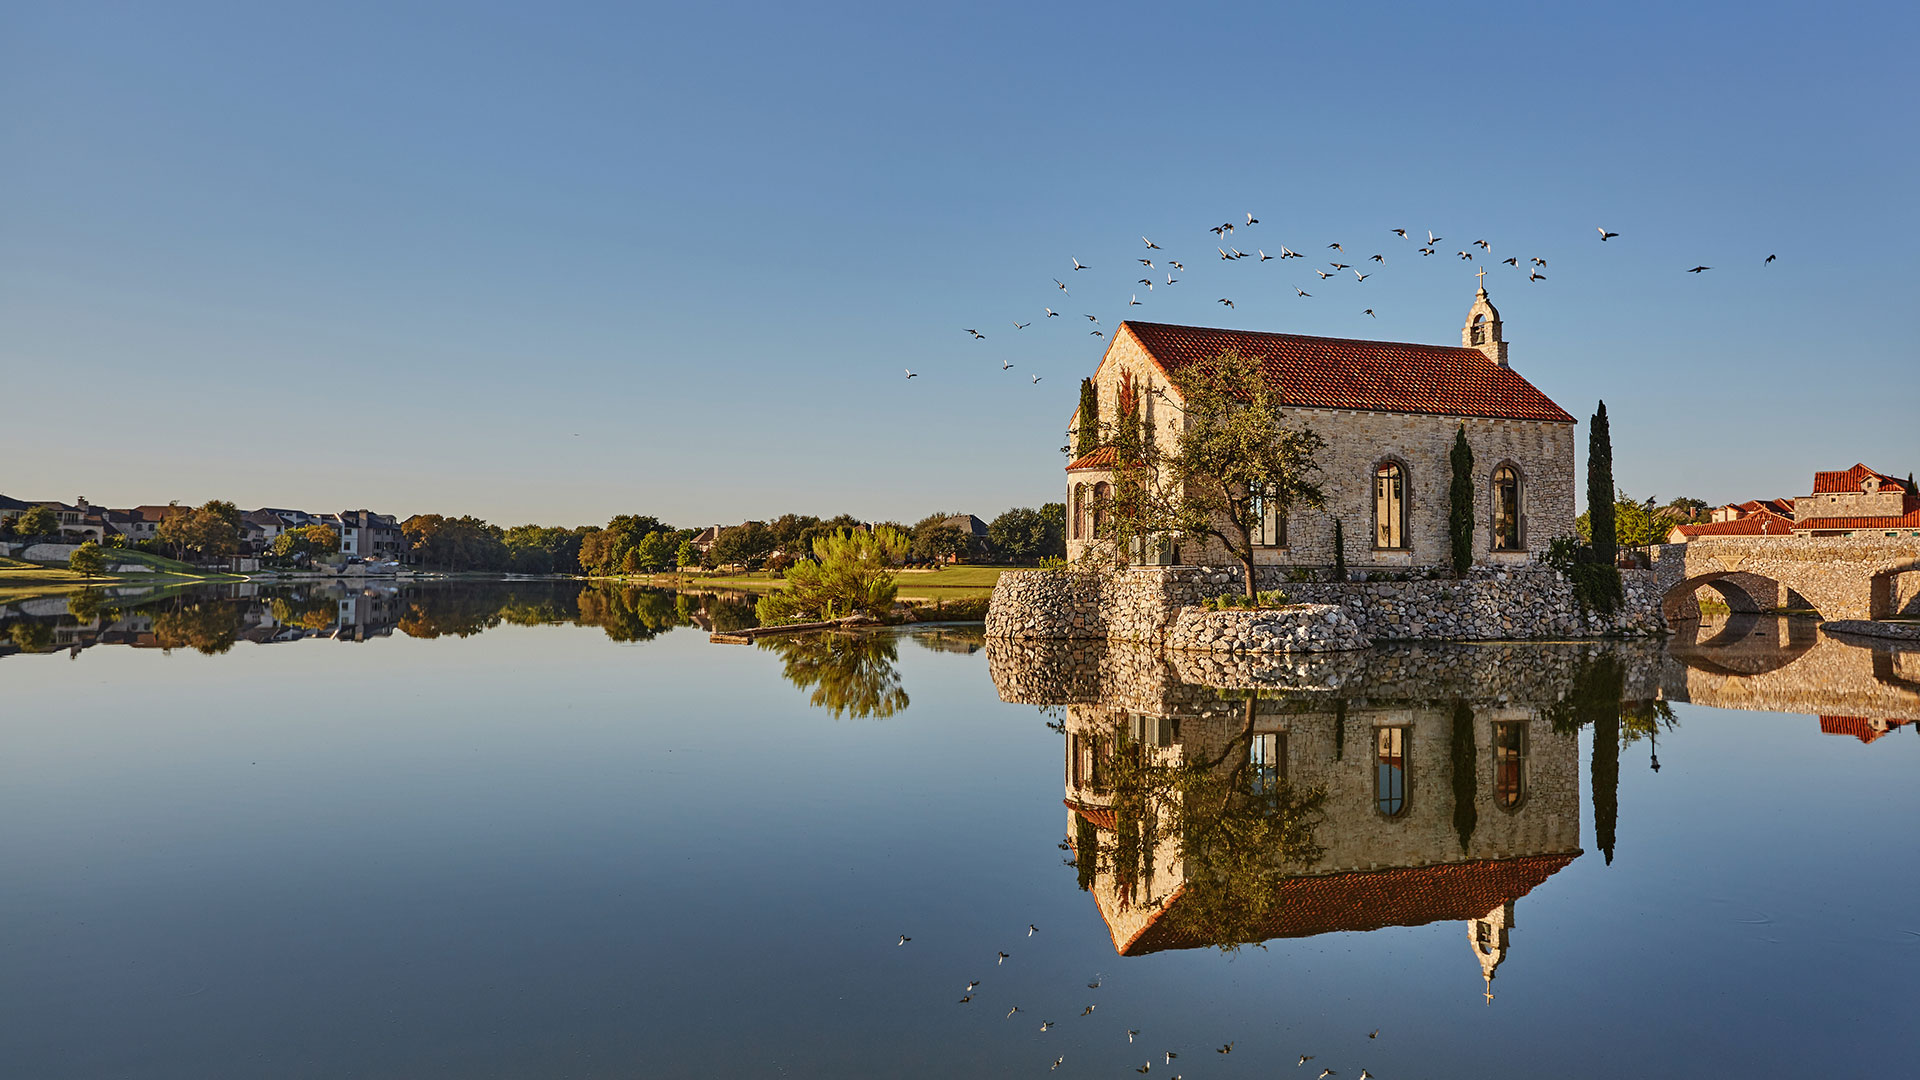 Looking across the lake at the Bella Donna Chapel at Adritica. The water is smooth, like glass and the reflection of the chapel is seen clearly. The foundation is stone as is the chapel. Trees are seen far off on the other side of the lake.